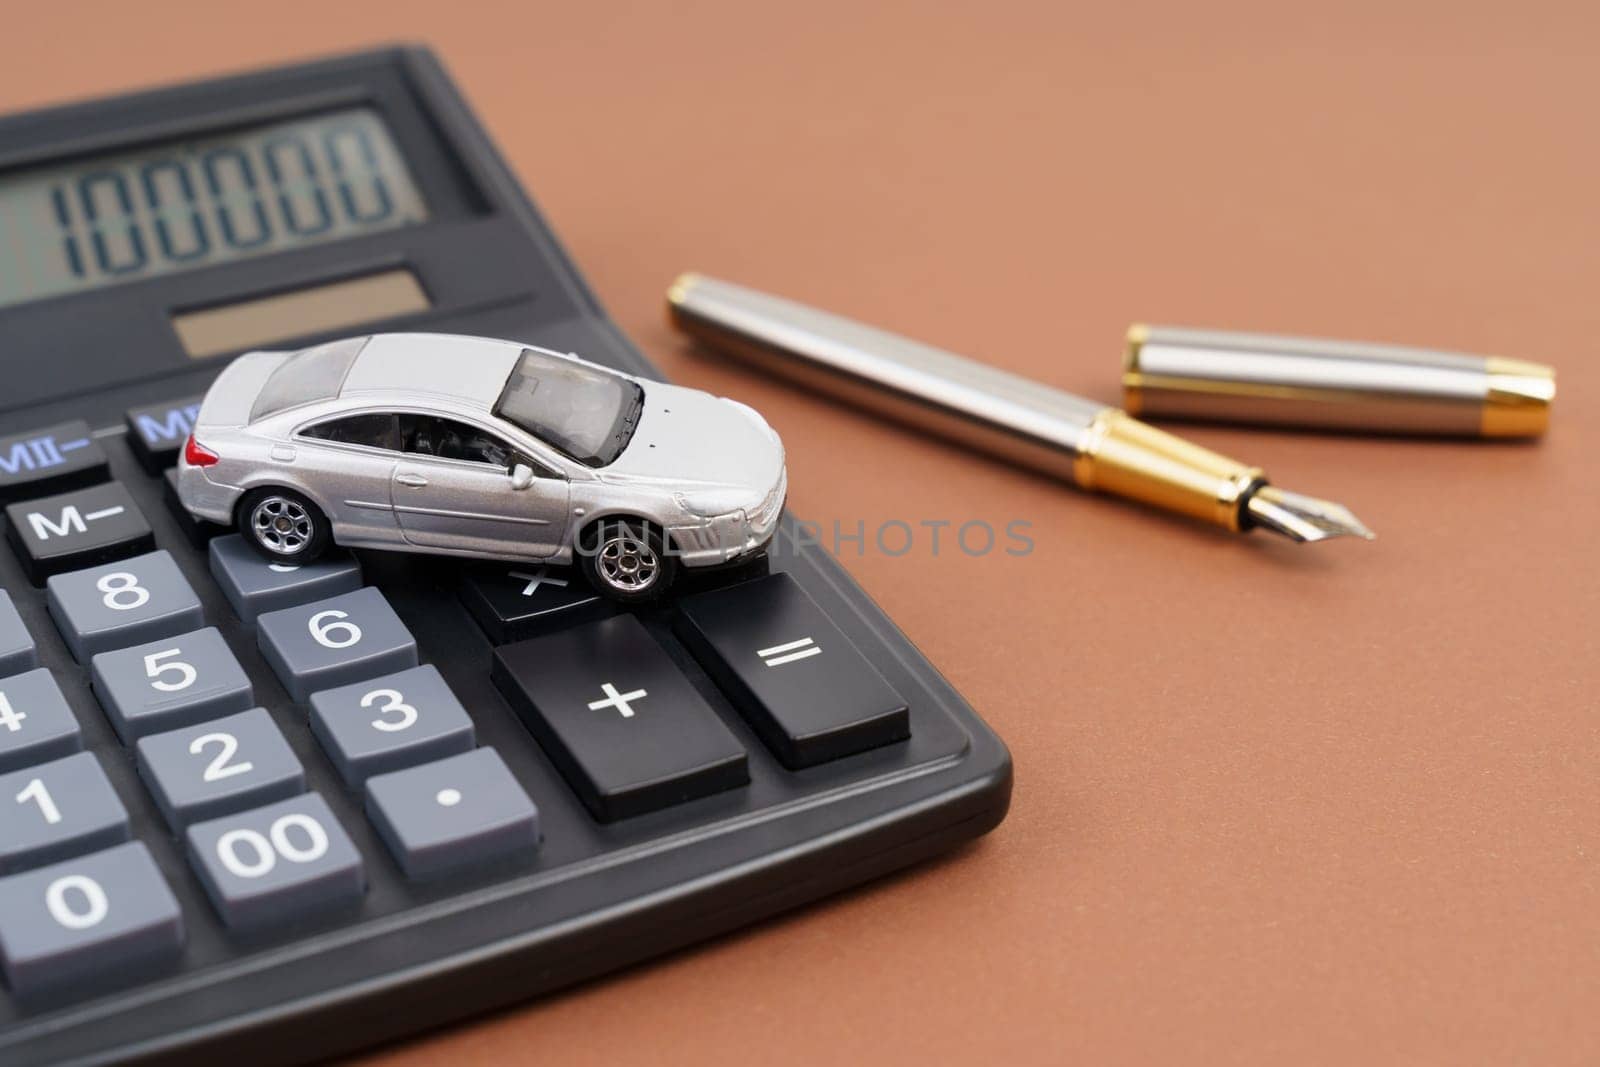 Toy car, calculator and pen on a brown background. Car rental, purchase or insurance. Business concept